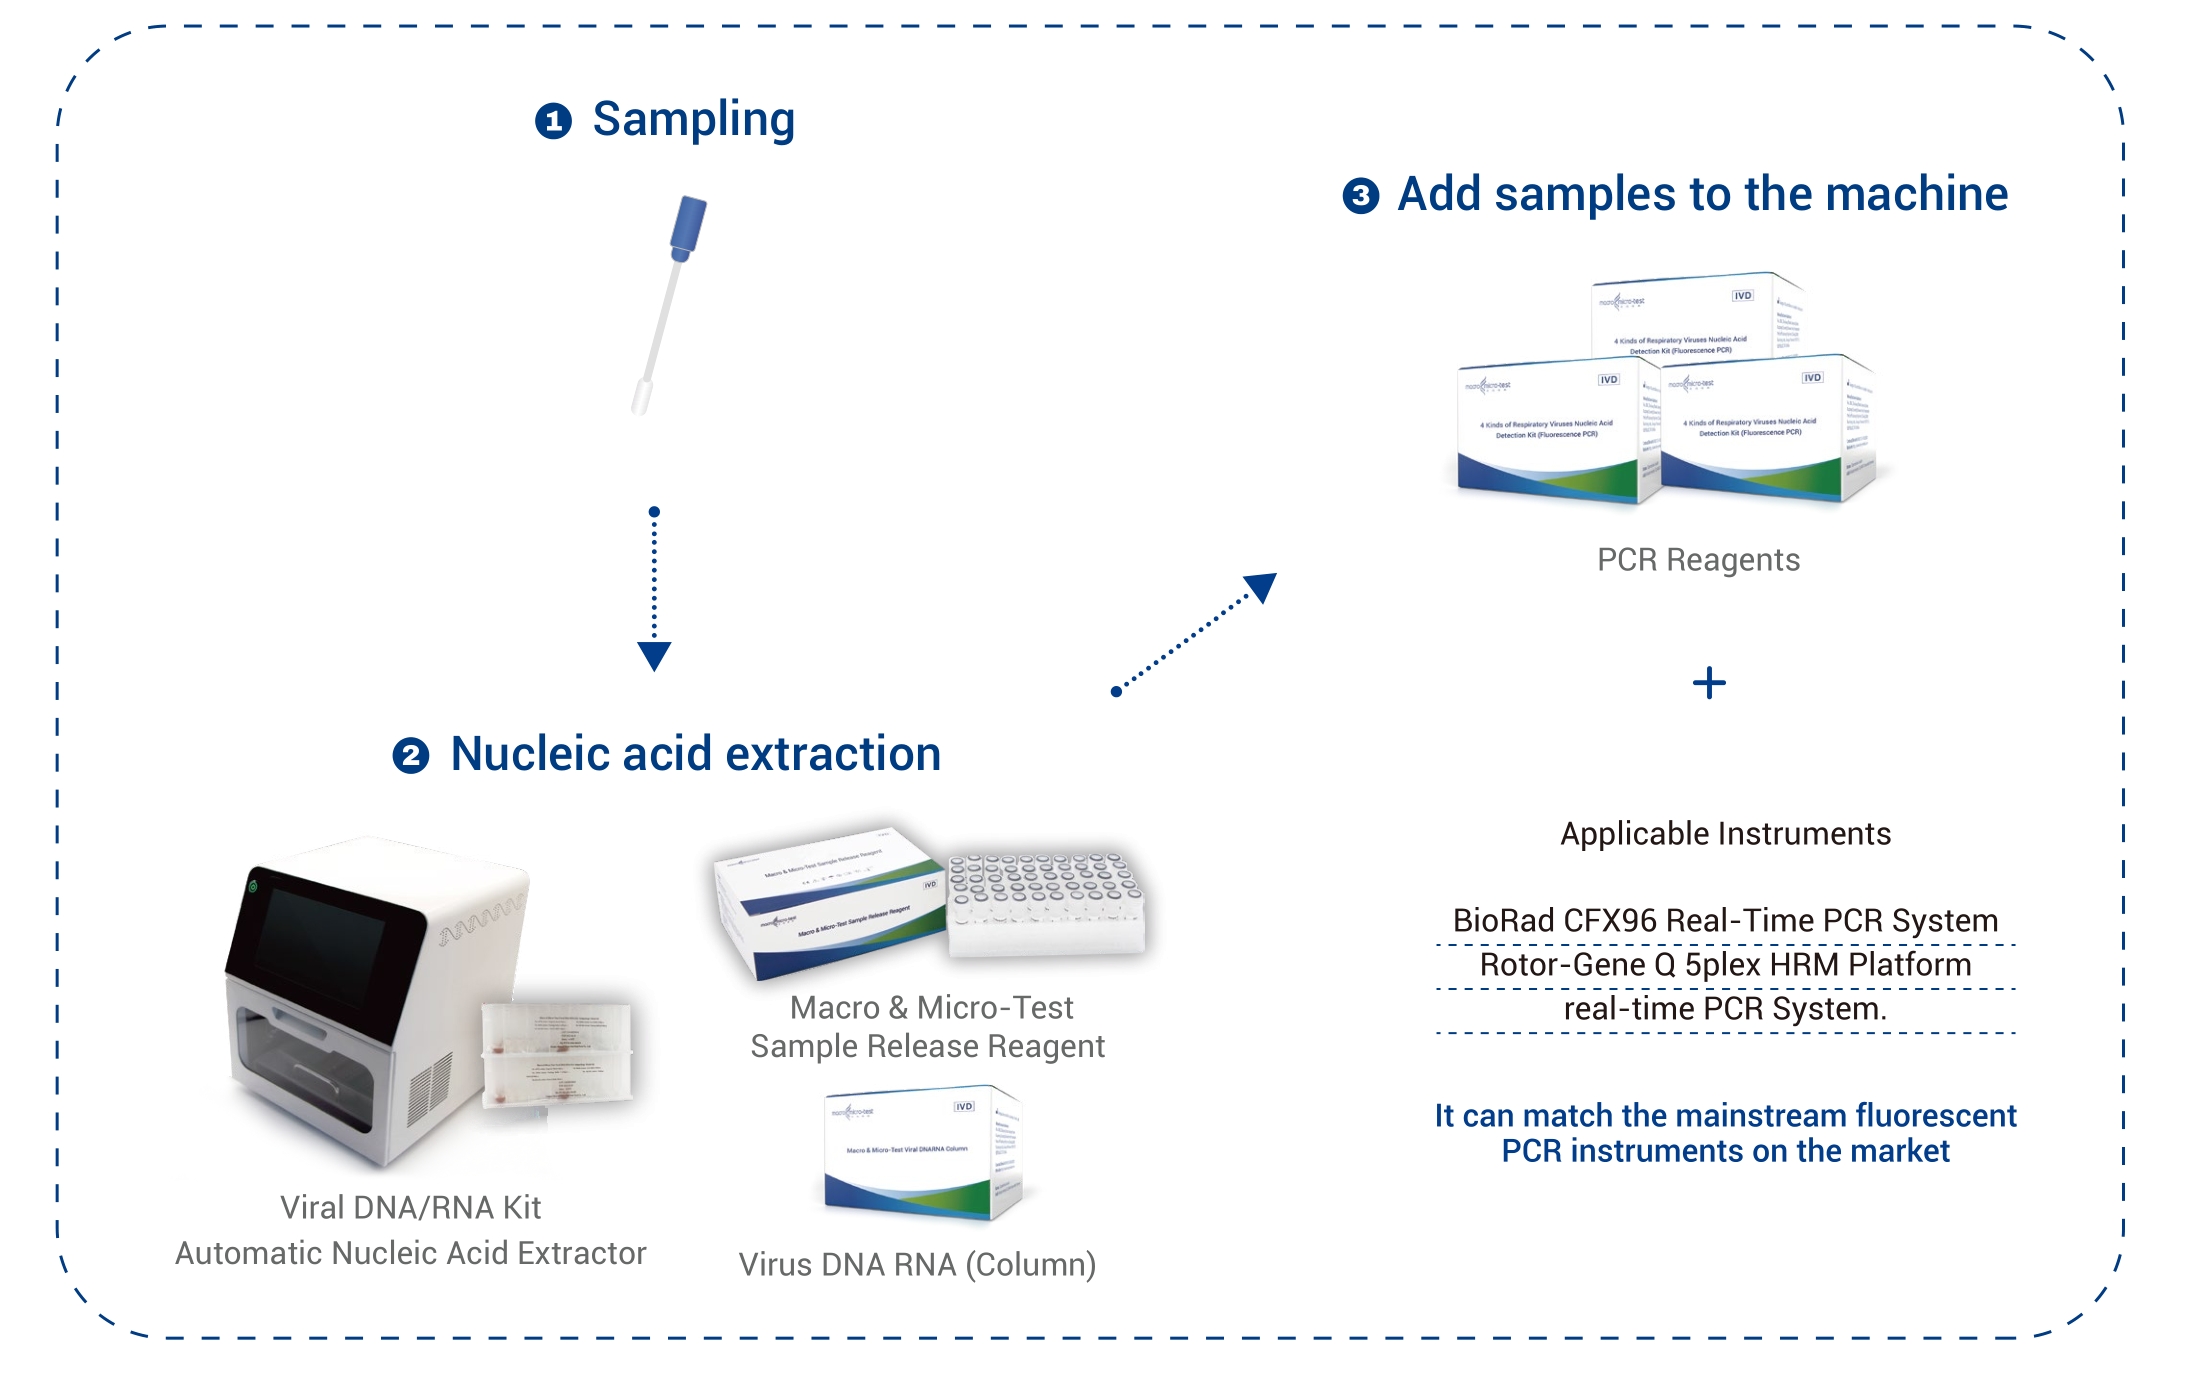 Respiratory Pathogens Combined Detection Kit(Fluorescence PCR)